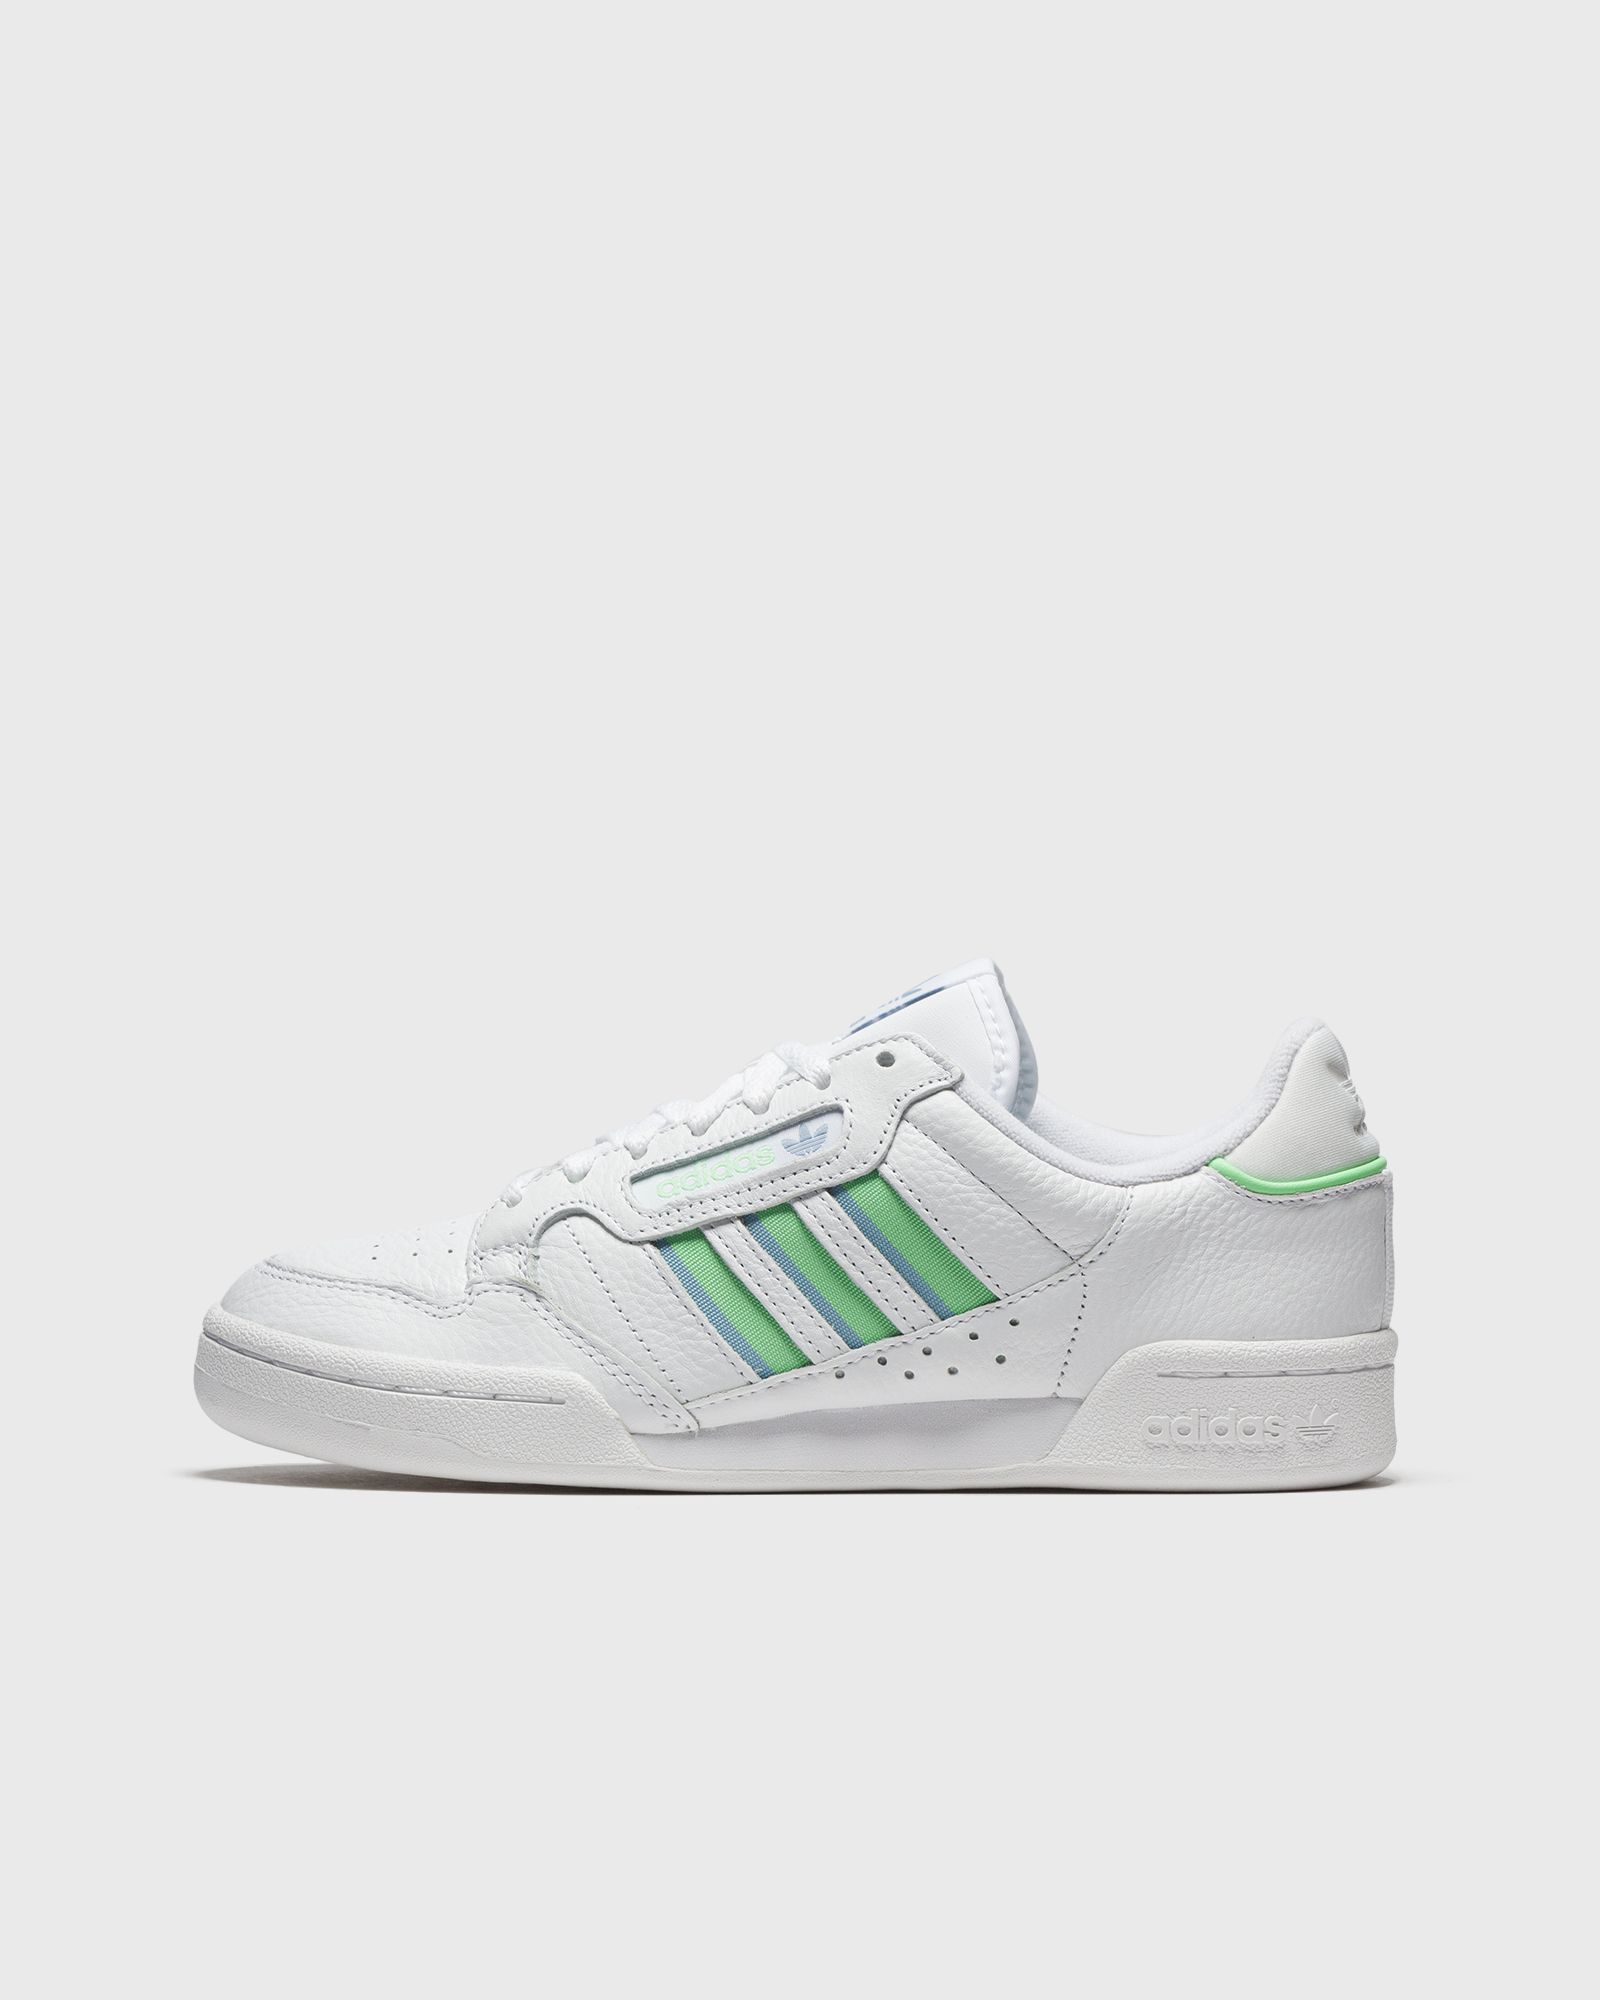 die Consider Render Adidas CONTINENTAL 80 STRIPES white female Lowtop now available at BSTN in  size 39 1/3 from BSTN - US | AccuWeather Shop